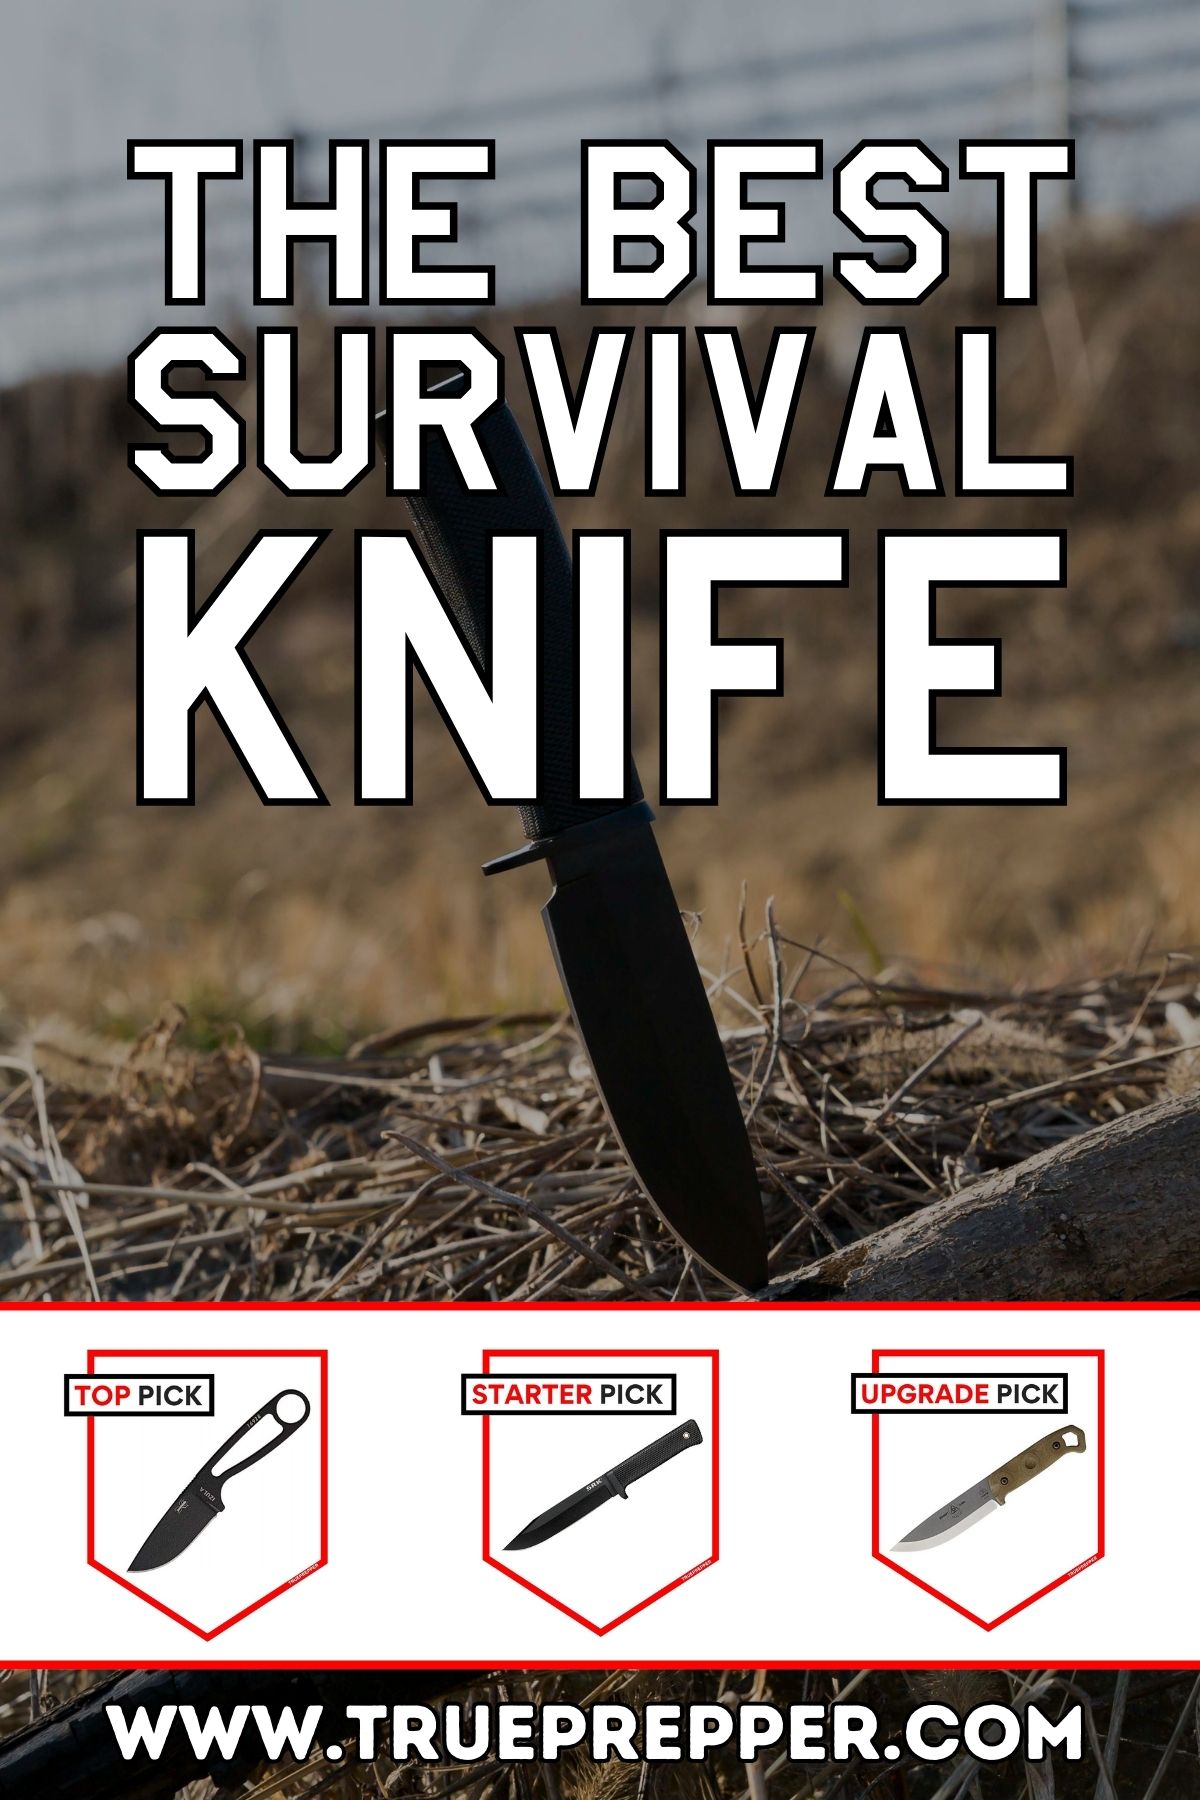 The Best Survival Knife